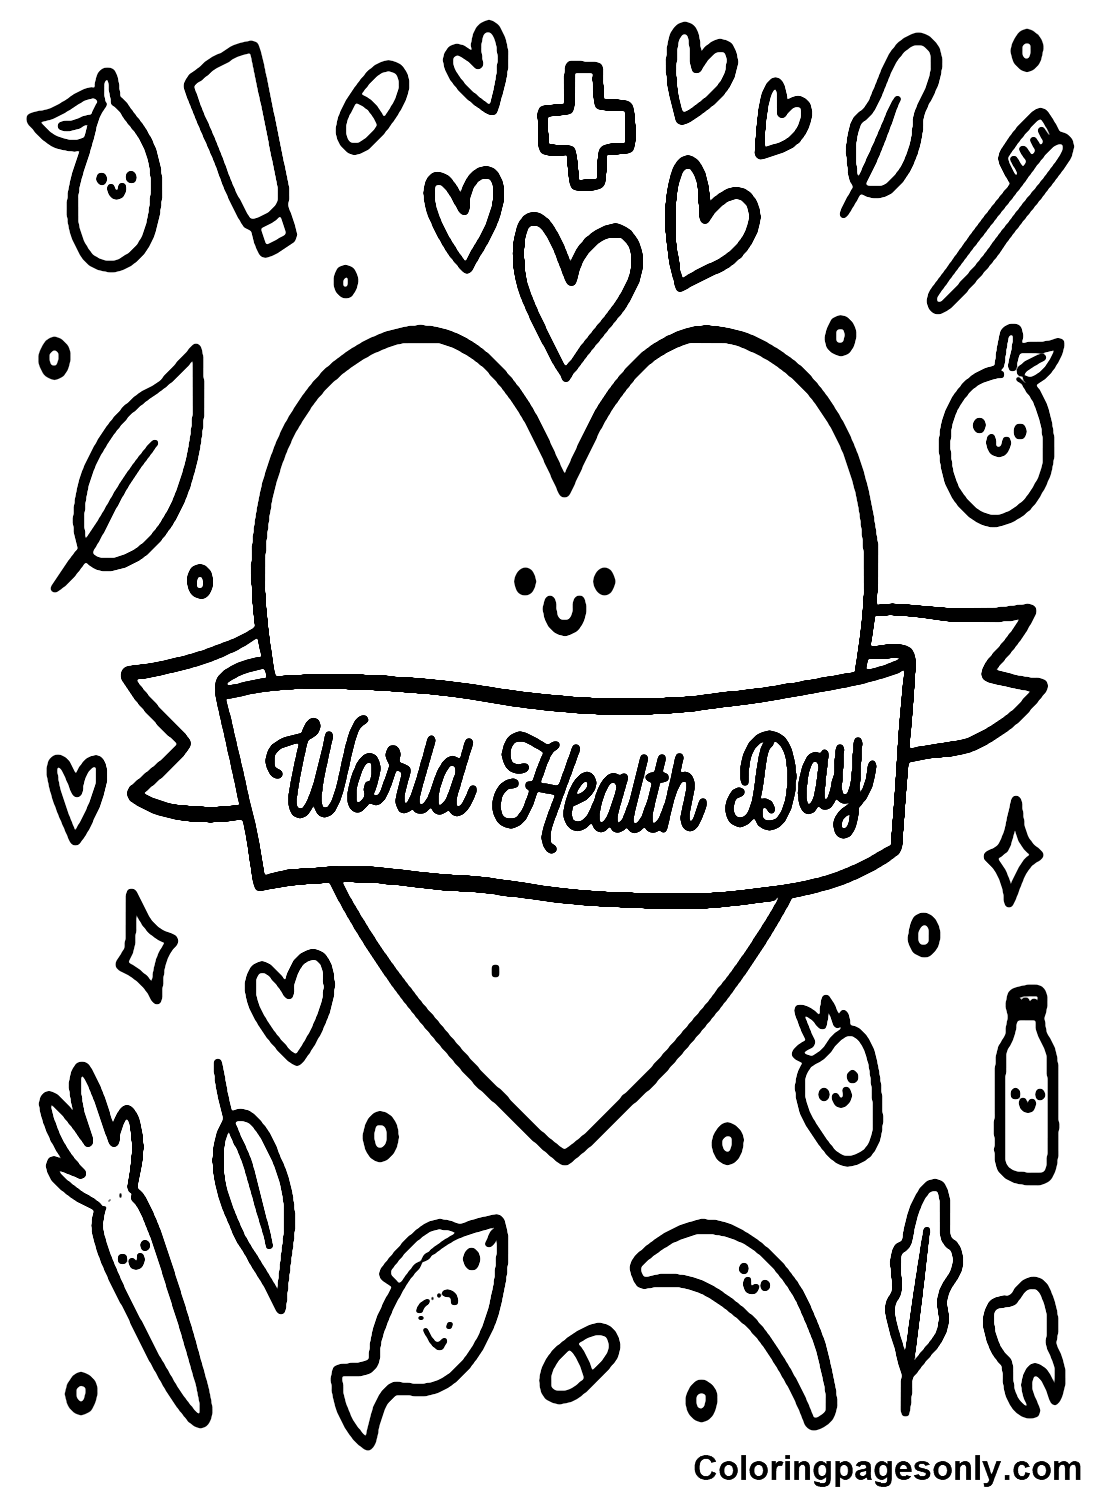 World Health Day Free Printable Coloring Pages